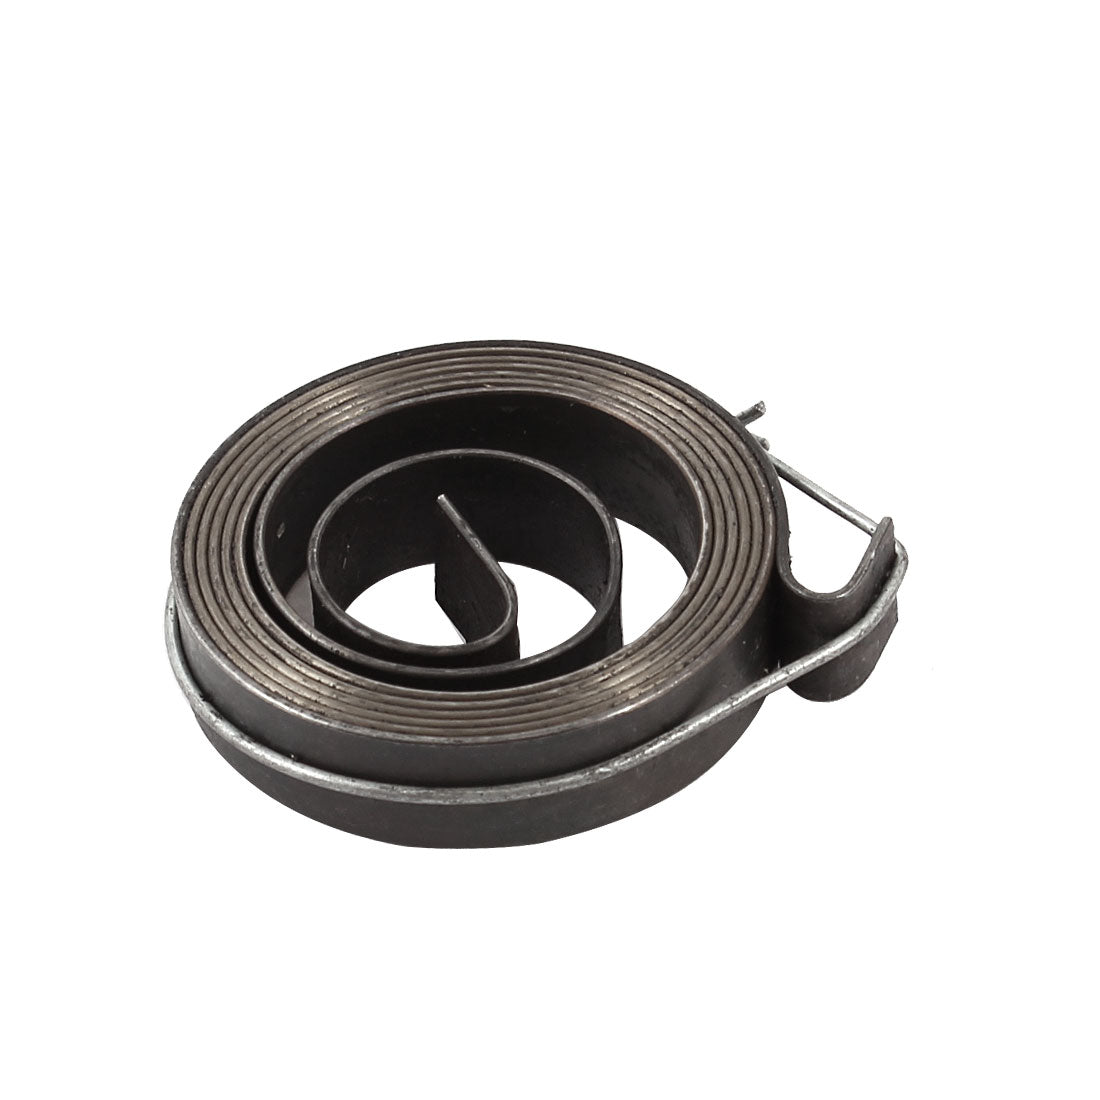 uxcell Uxcell Drill Press Quill Feed Return Coil Spring Assembly 0.7mm x 8mm x 1540mm